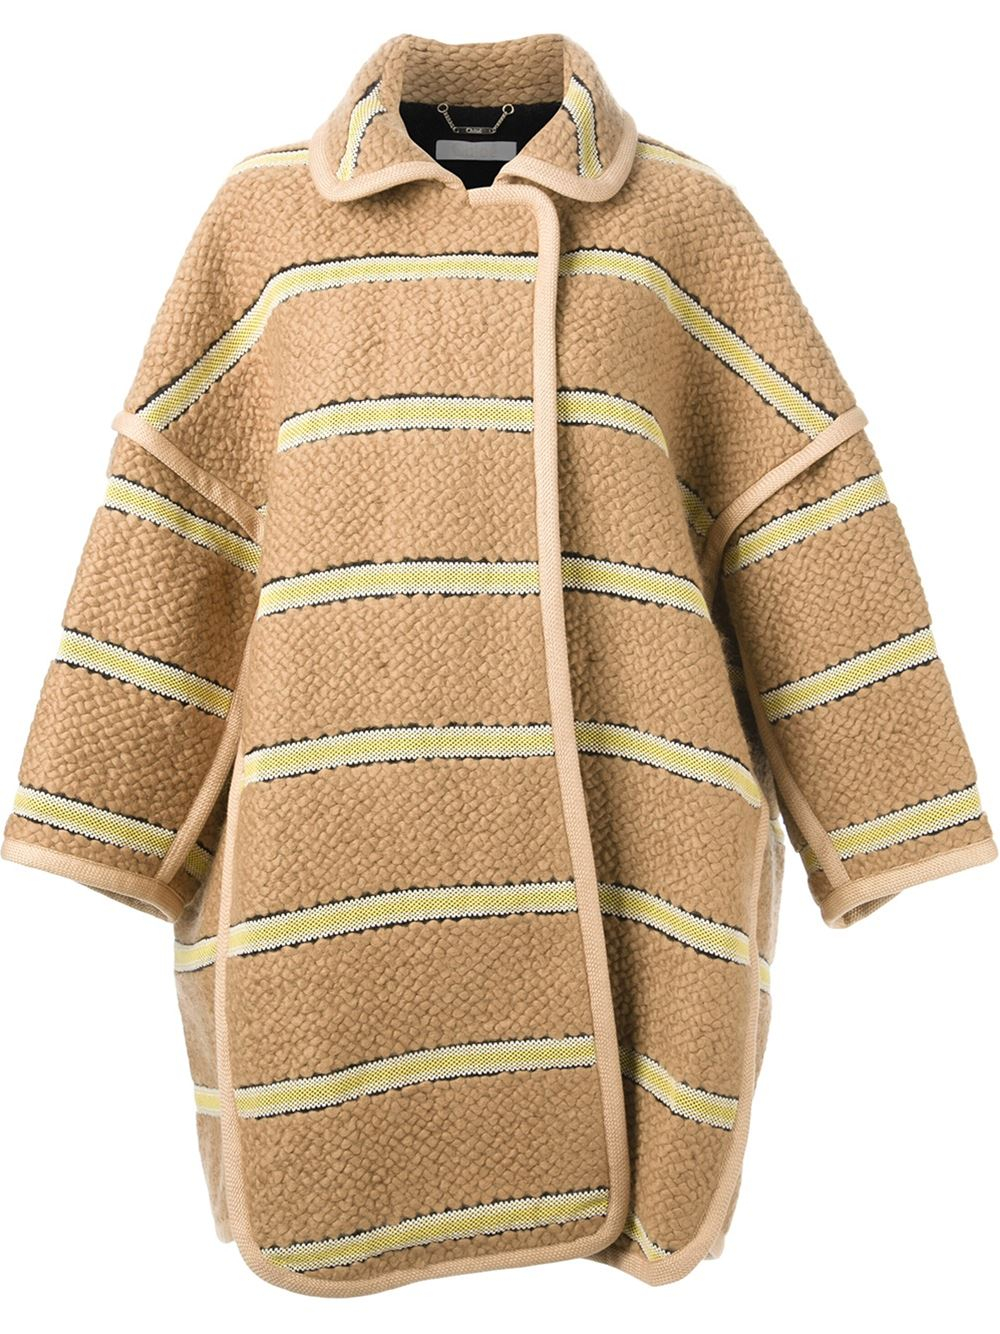 Lyst - Chloé Striped Oversized Coat in Natural